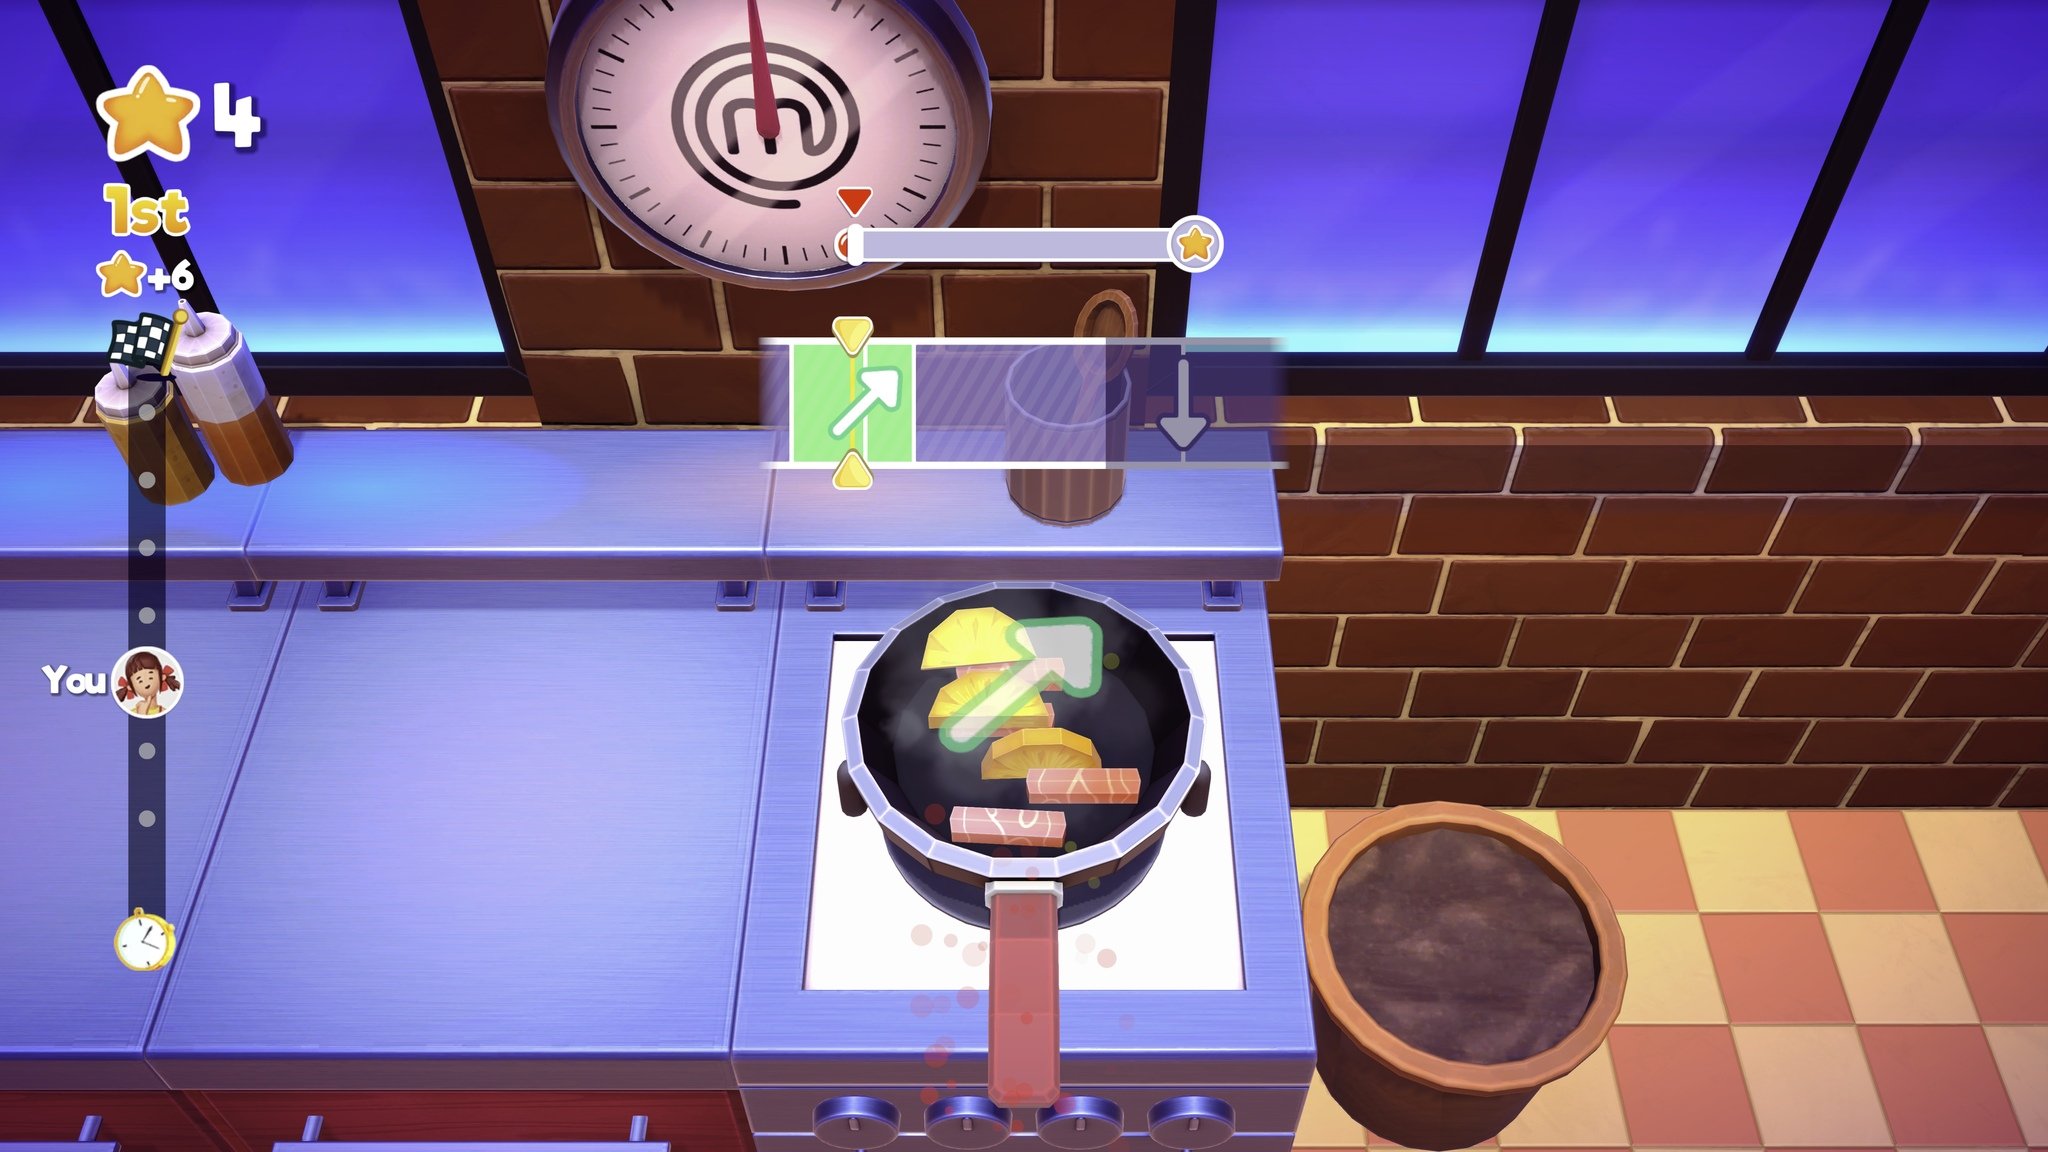 MasterChef: Let's Cook! brings new weekly challenges to Apple Arcade